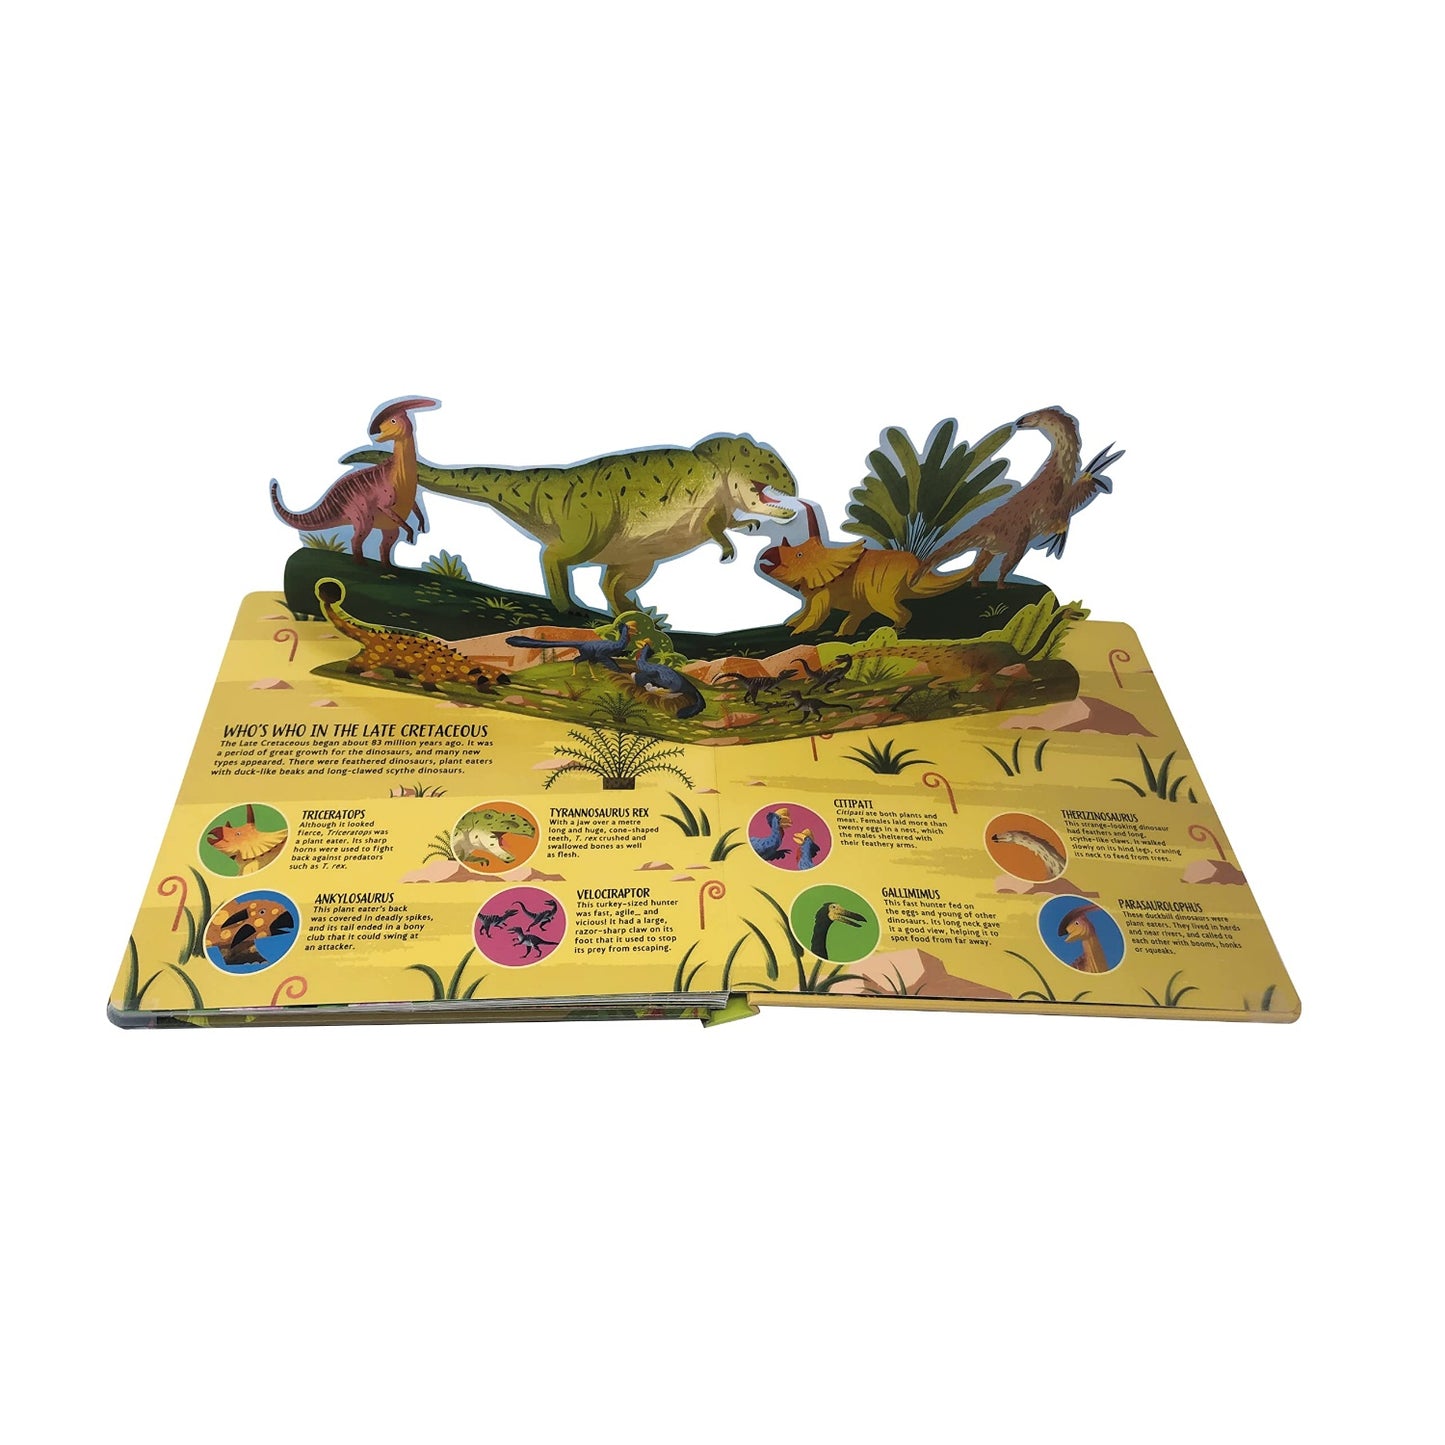 Dinosaurs - Pop-Up Planet | Hardcover | Children’s Book on Nature